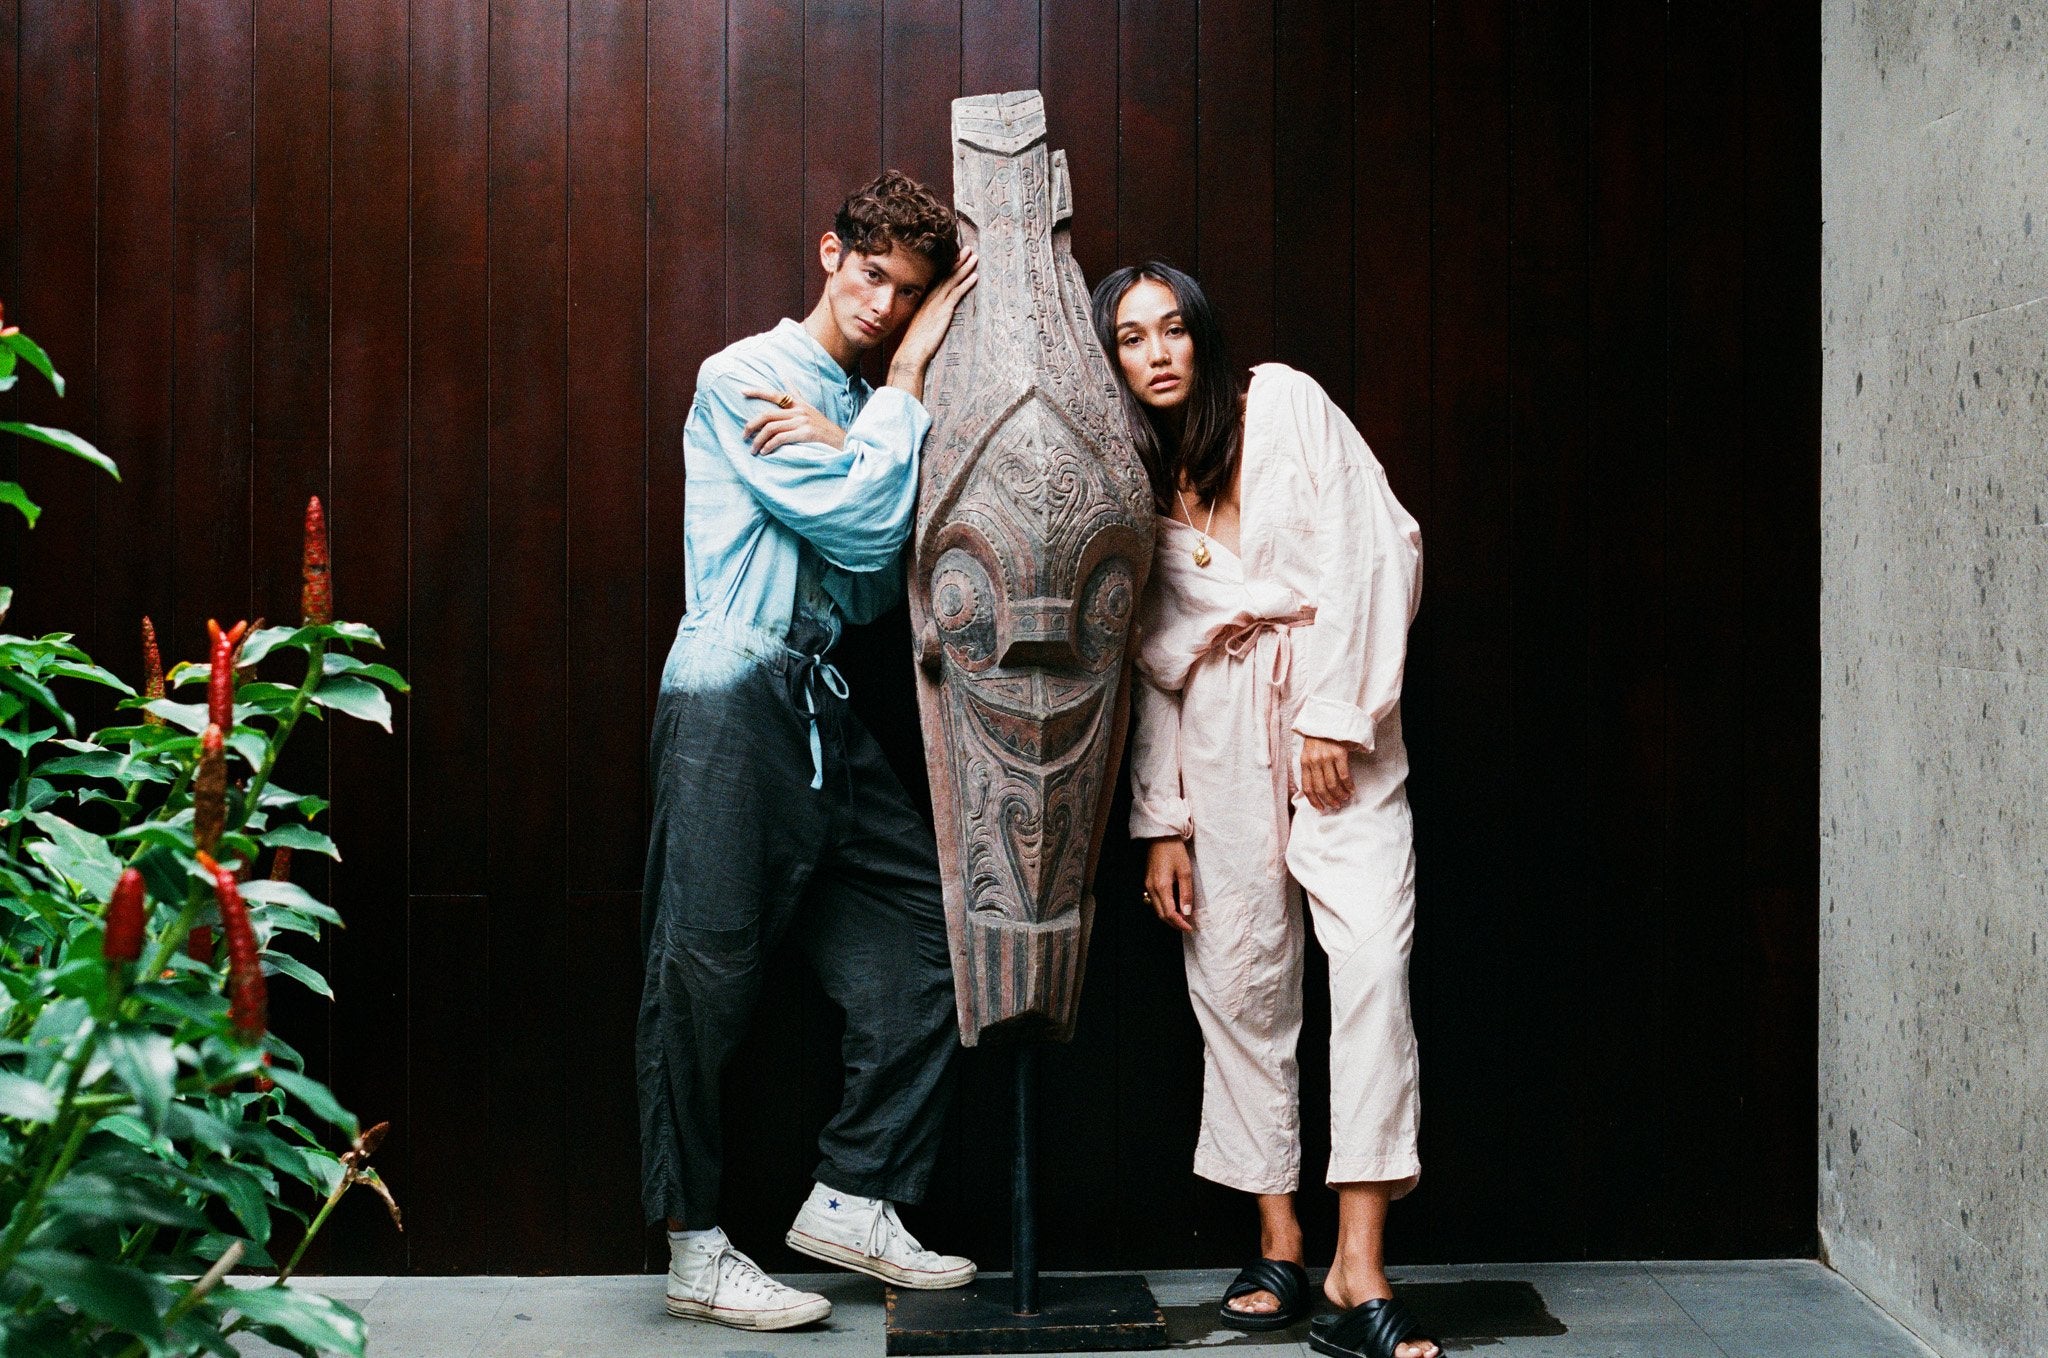 Look book photo Adventure Sail Jumpsuit in Two Tone Earth Meets Ocean and One Tone Coconut Pink featuring models Johnny and Amira.  